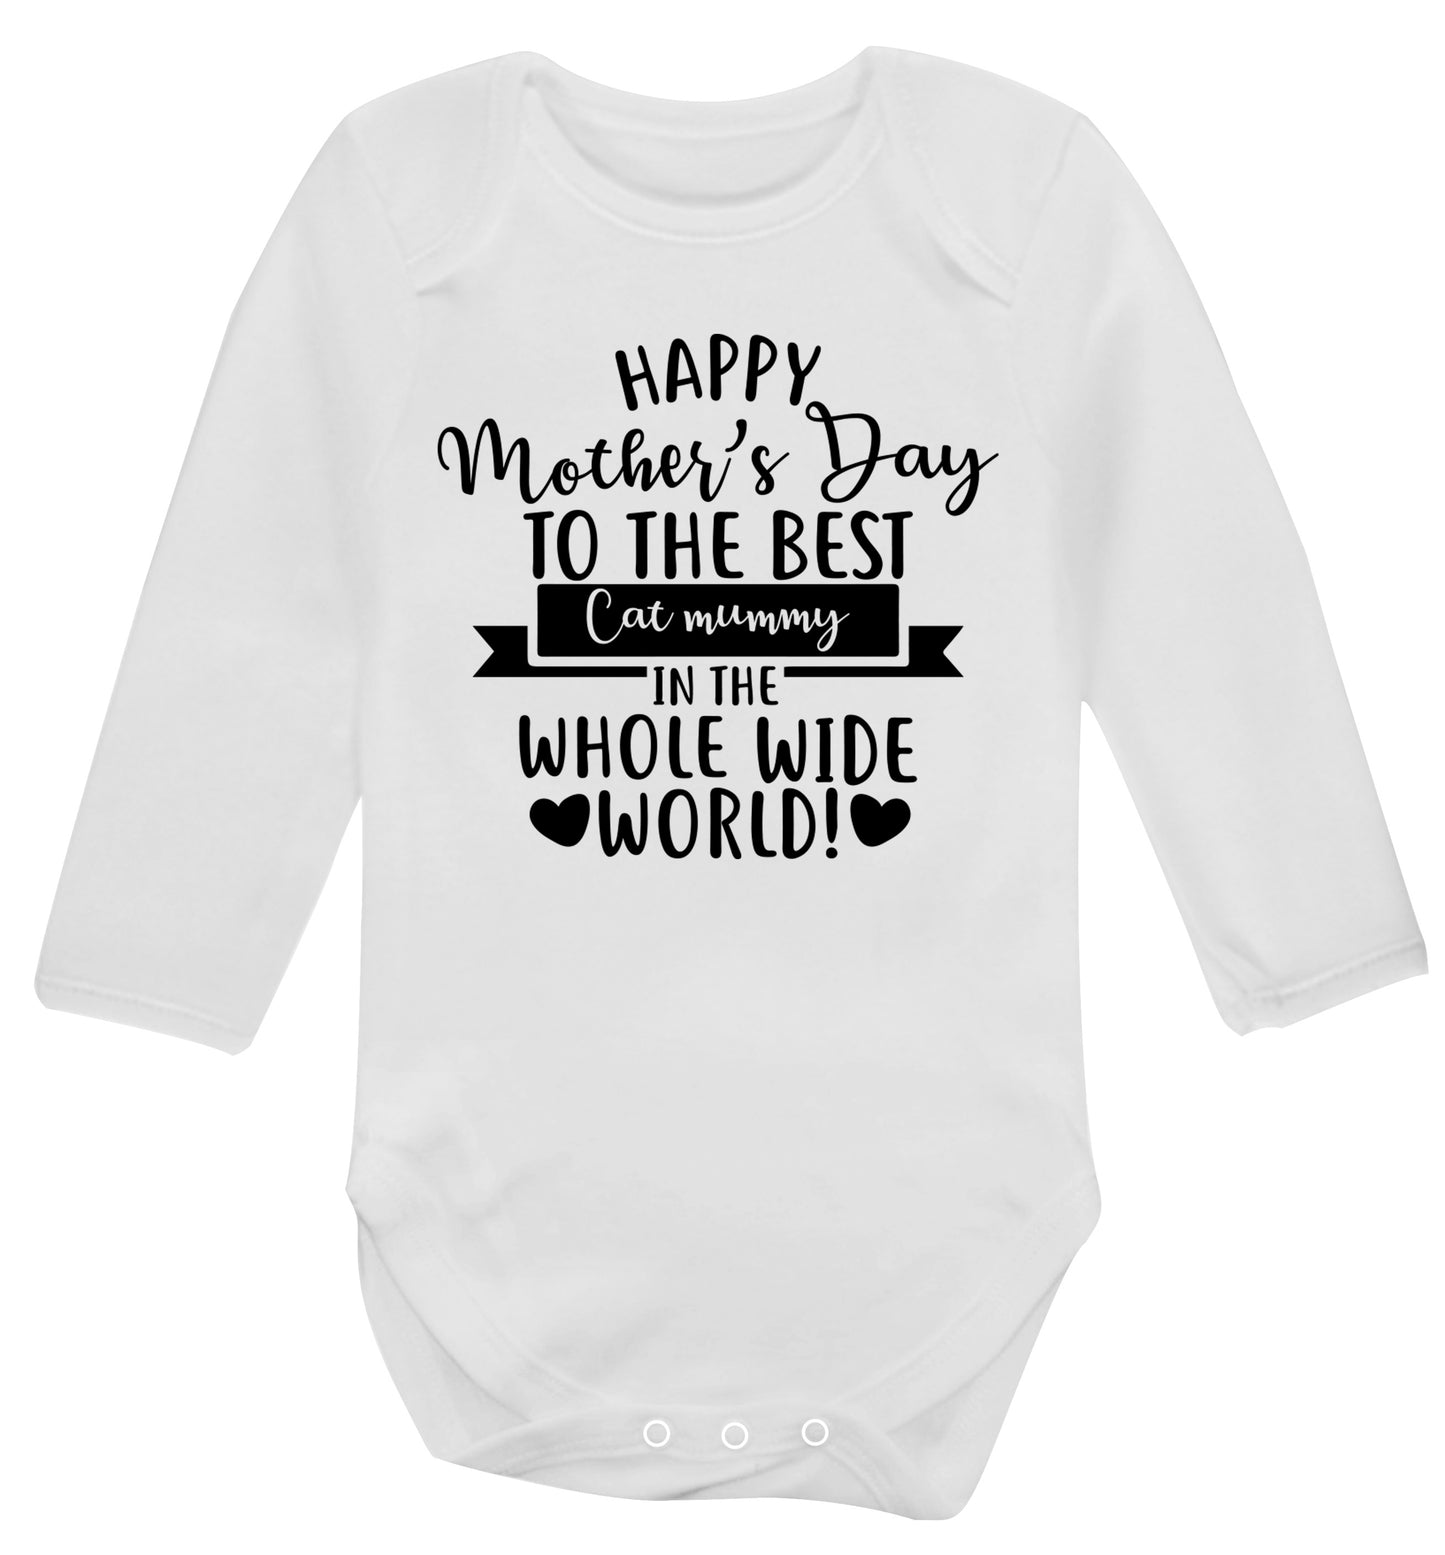 Happy mother's day to the best cat mummy in the world Baby Vest long sleeved white 6-12 months